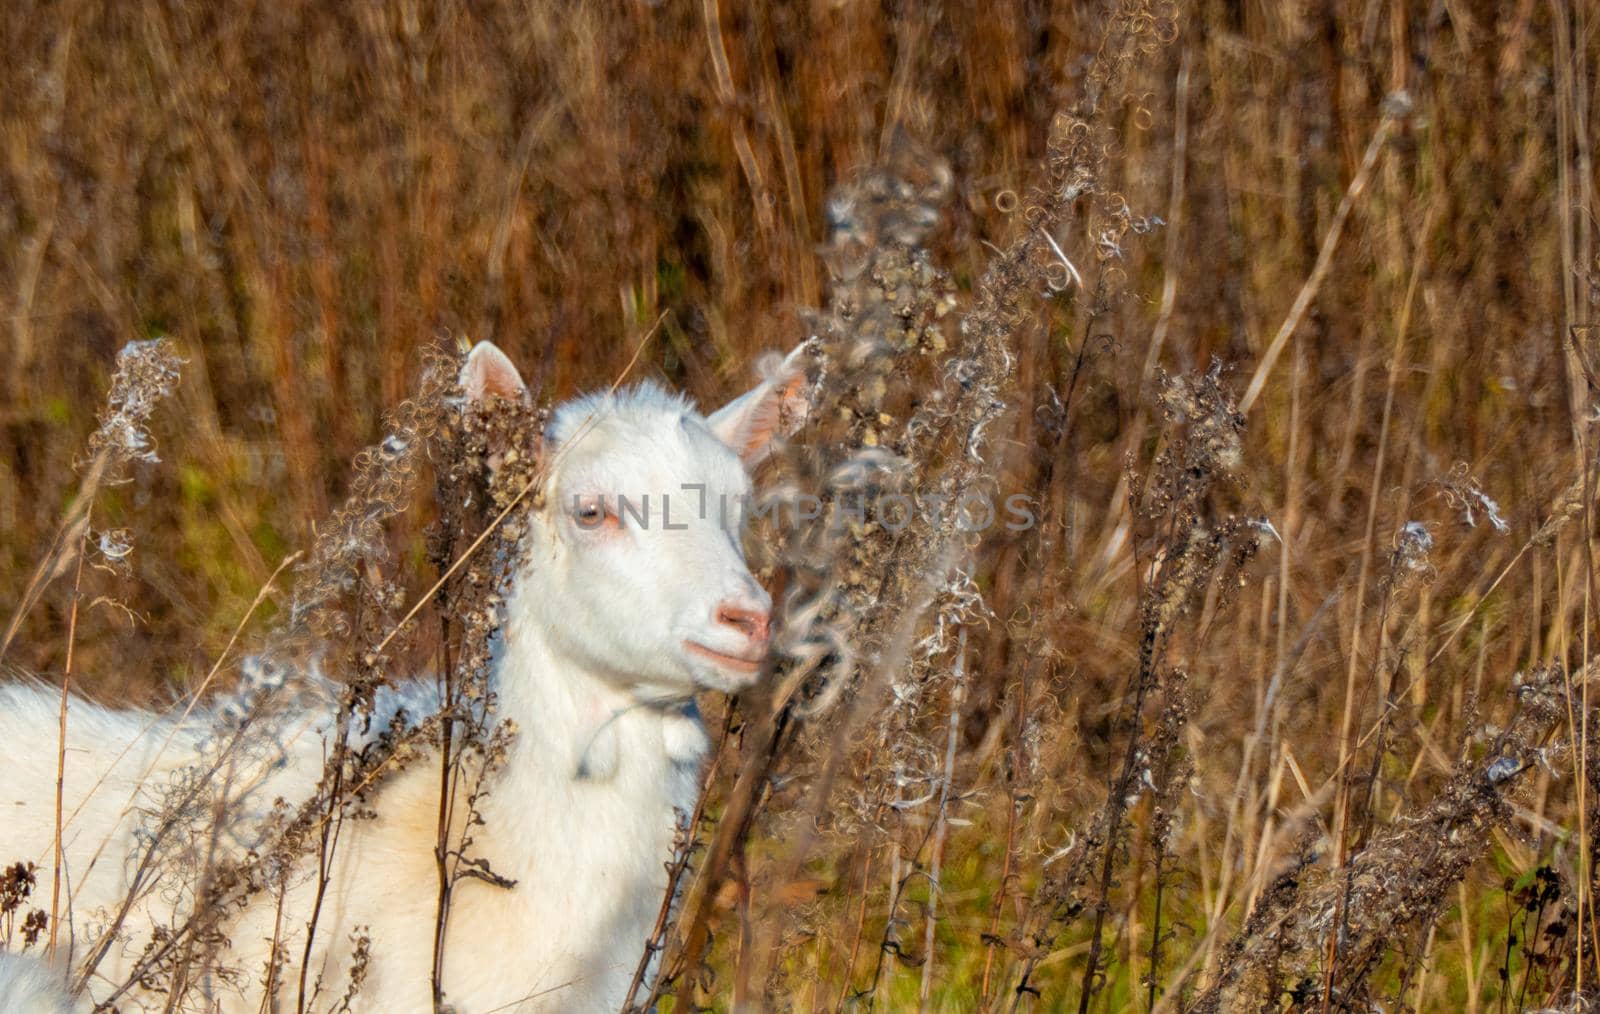 Goat eating withered grass, Livestock on a pasture. White goat. Cattle on a village farm. Cattle on a village farm. by kajasja